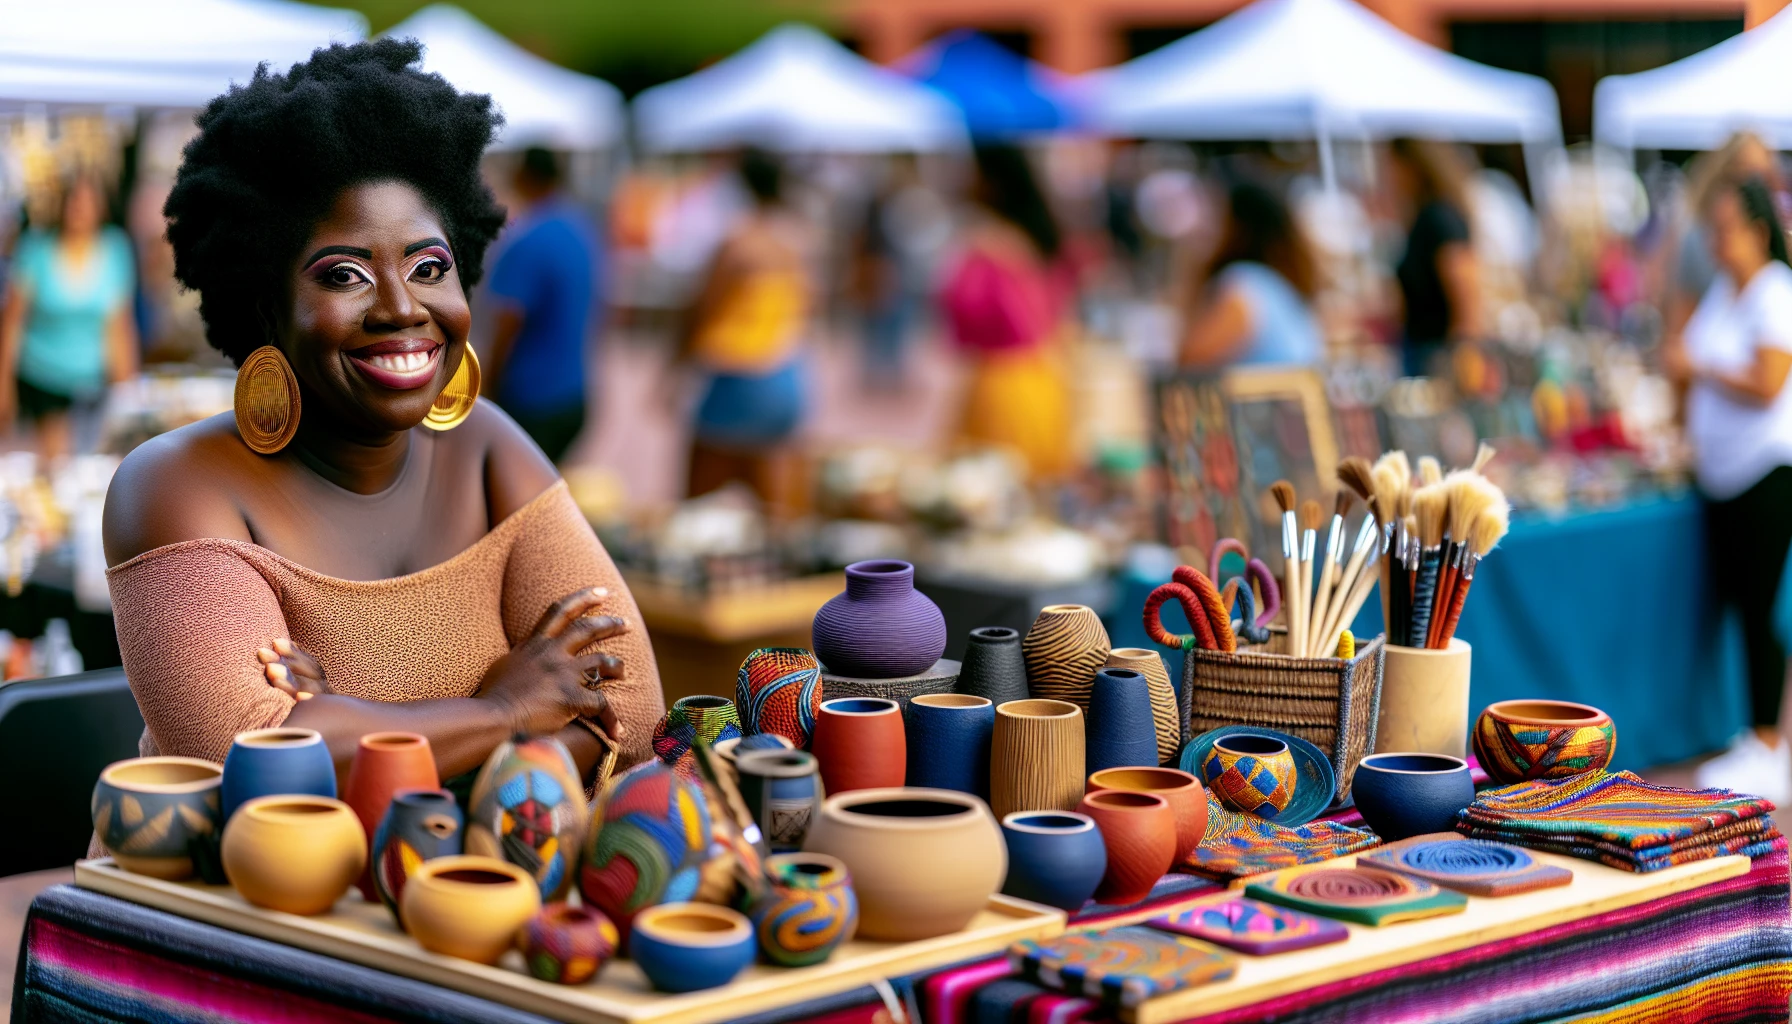 A woman showcasing her handmade crafts on a table